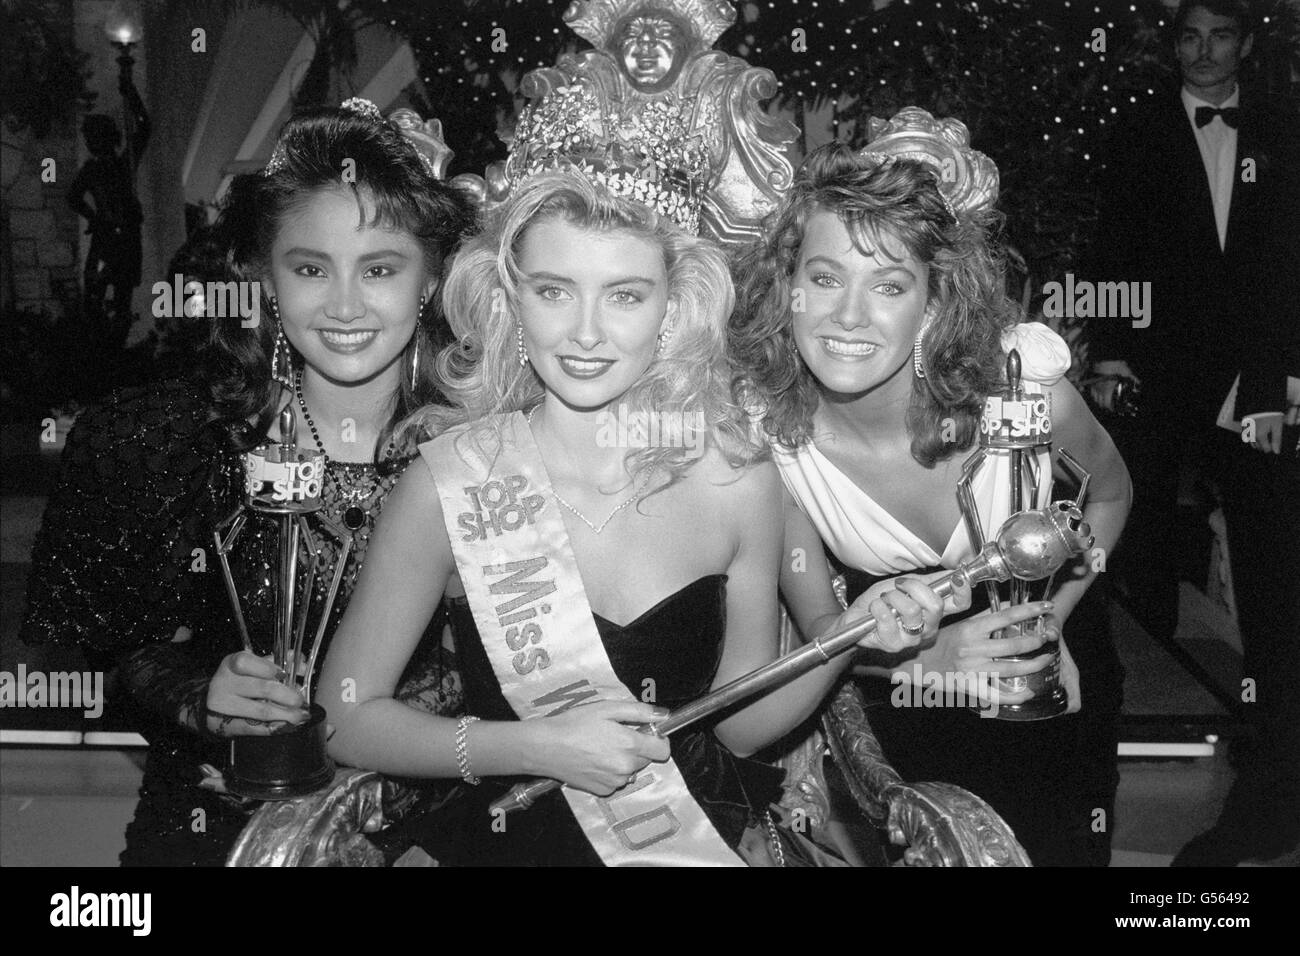 Miss Iceland Linda Petursdottir, 18, Miss World 1988 flanked by first runner-up, Miss Korea, Yeon-He Choi, 22, and second runner-up Miss UK, Kirsty Roper, 17, after the contest at the Royal Albert Hall. Stock Photo